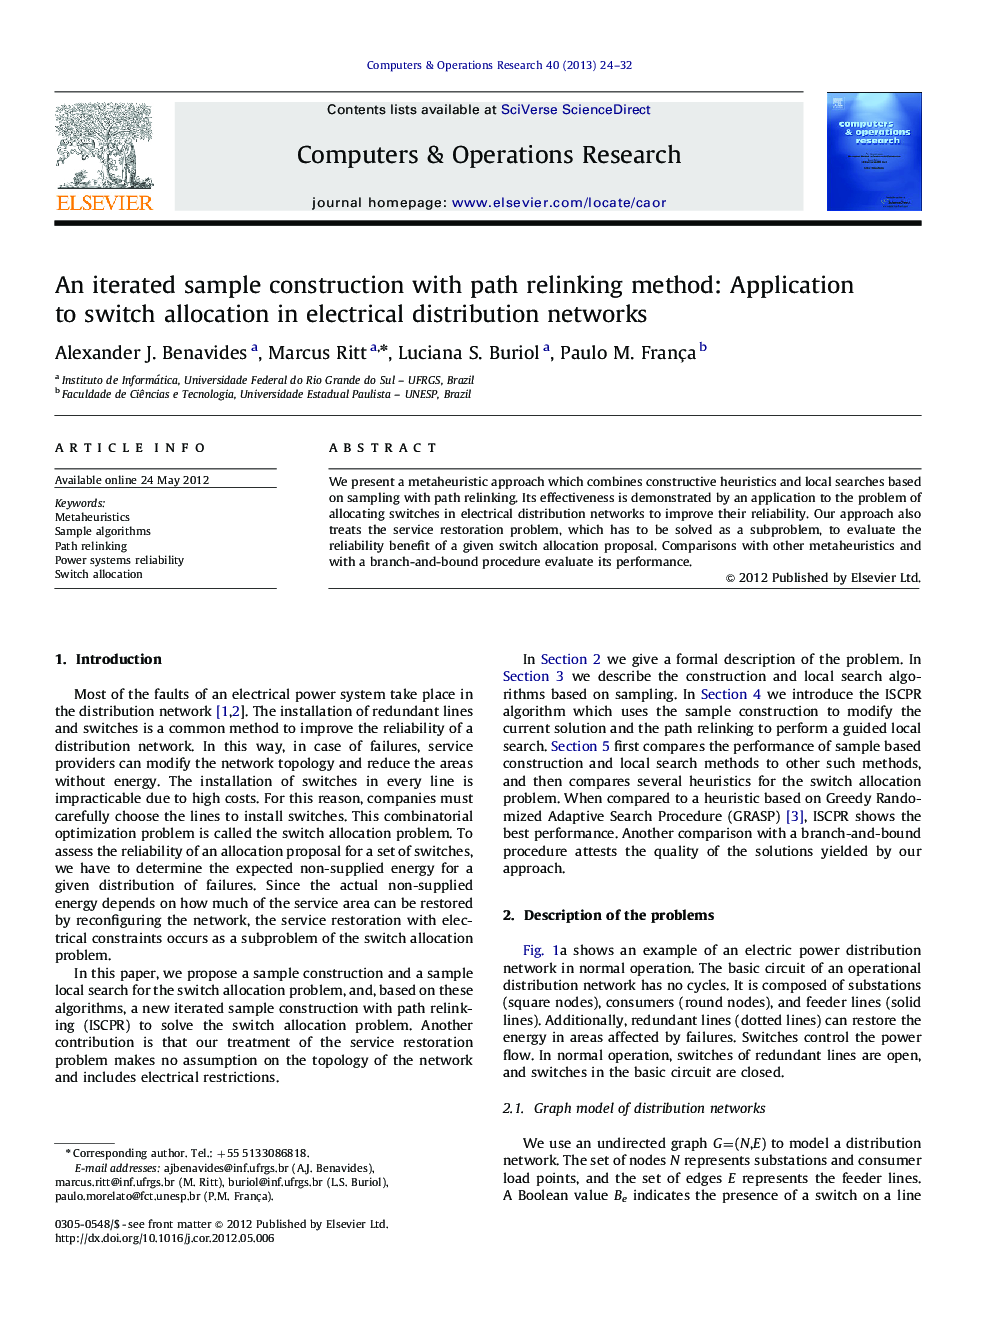 An iterated sample construction with path relinking method: Application to switch allocation in electrical distribution networks